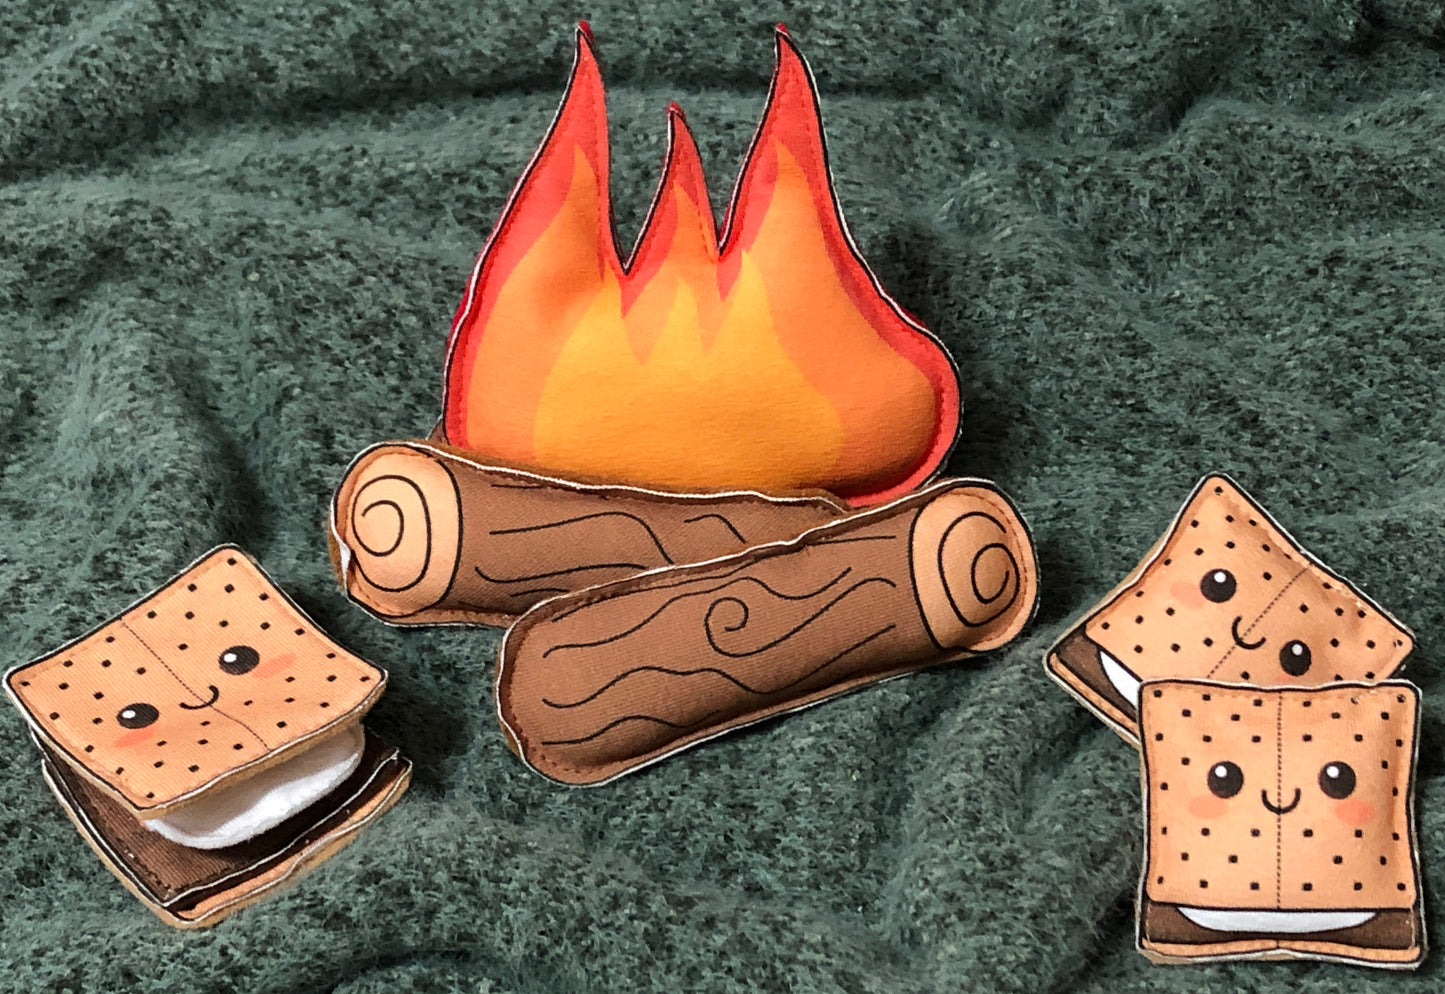 Elf/Doll MInis Campfire, Smores and Pizza panel pack